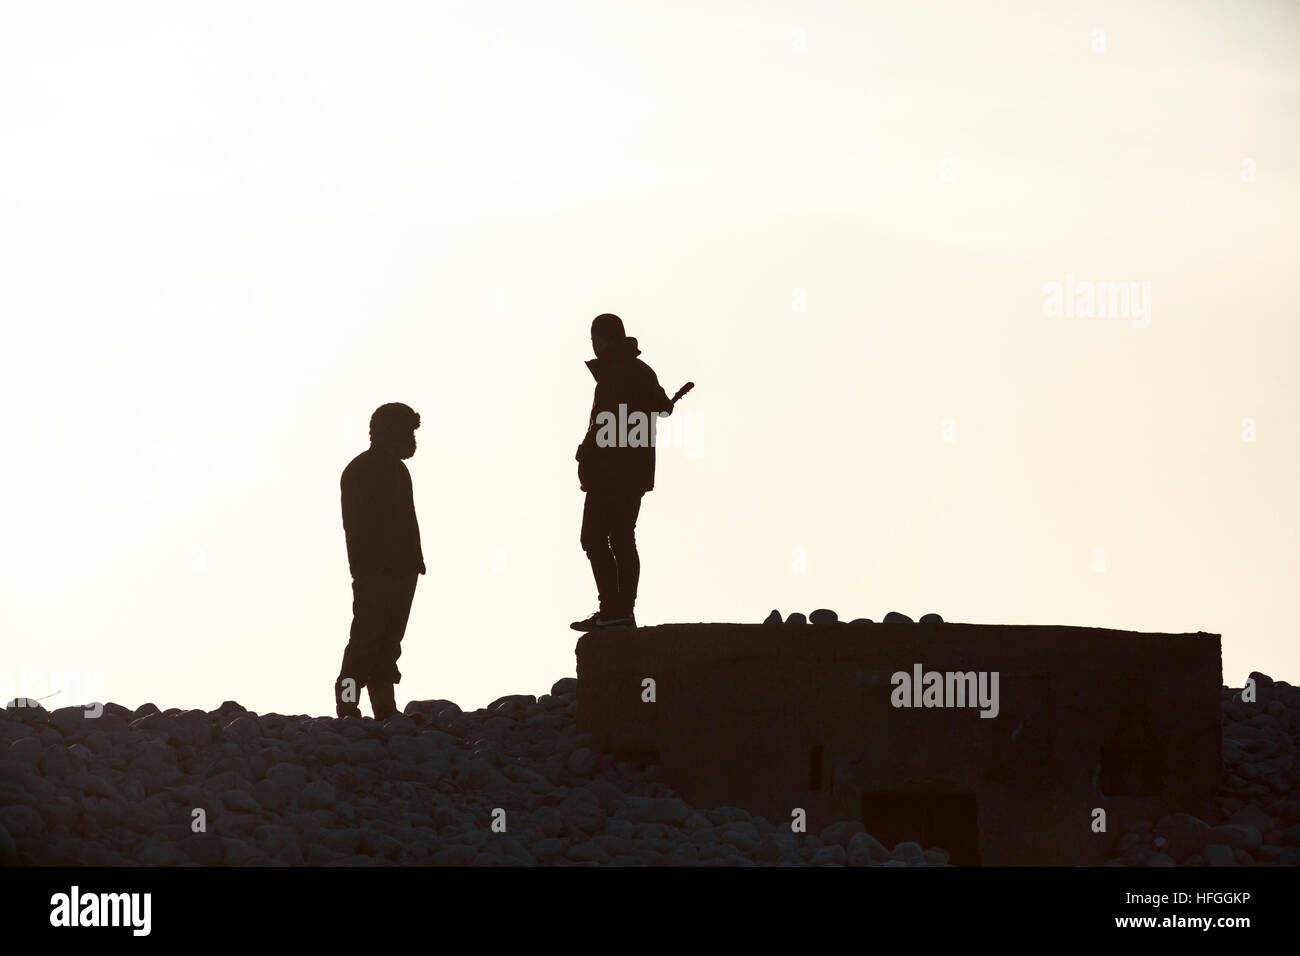 silhouette of two threatening adolescents Stock Photo